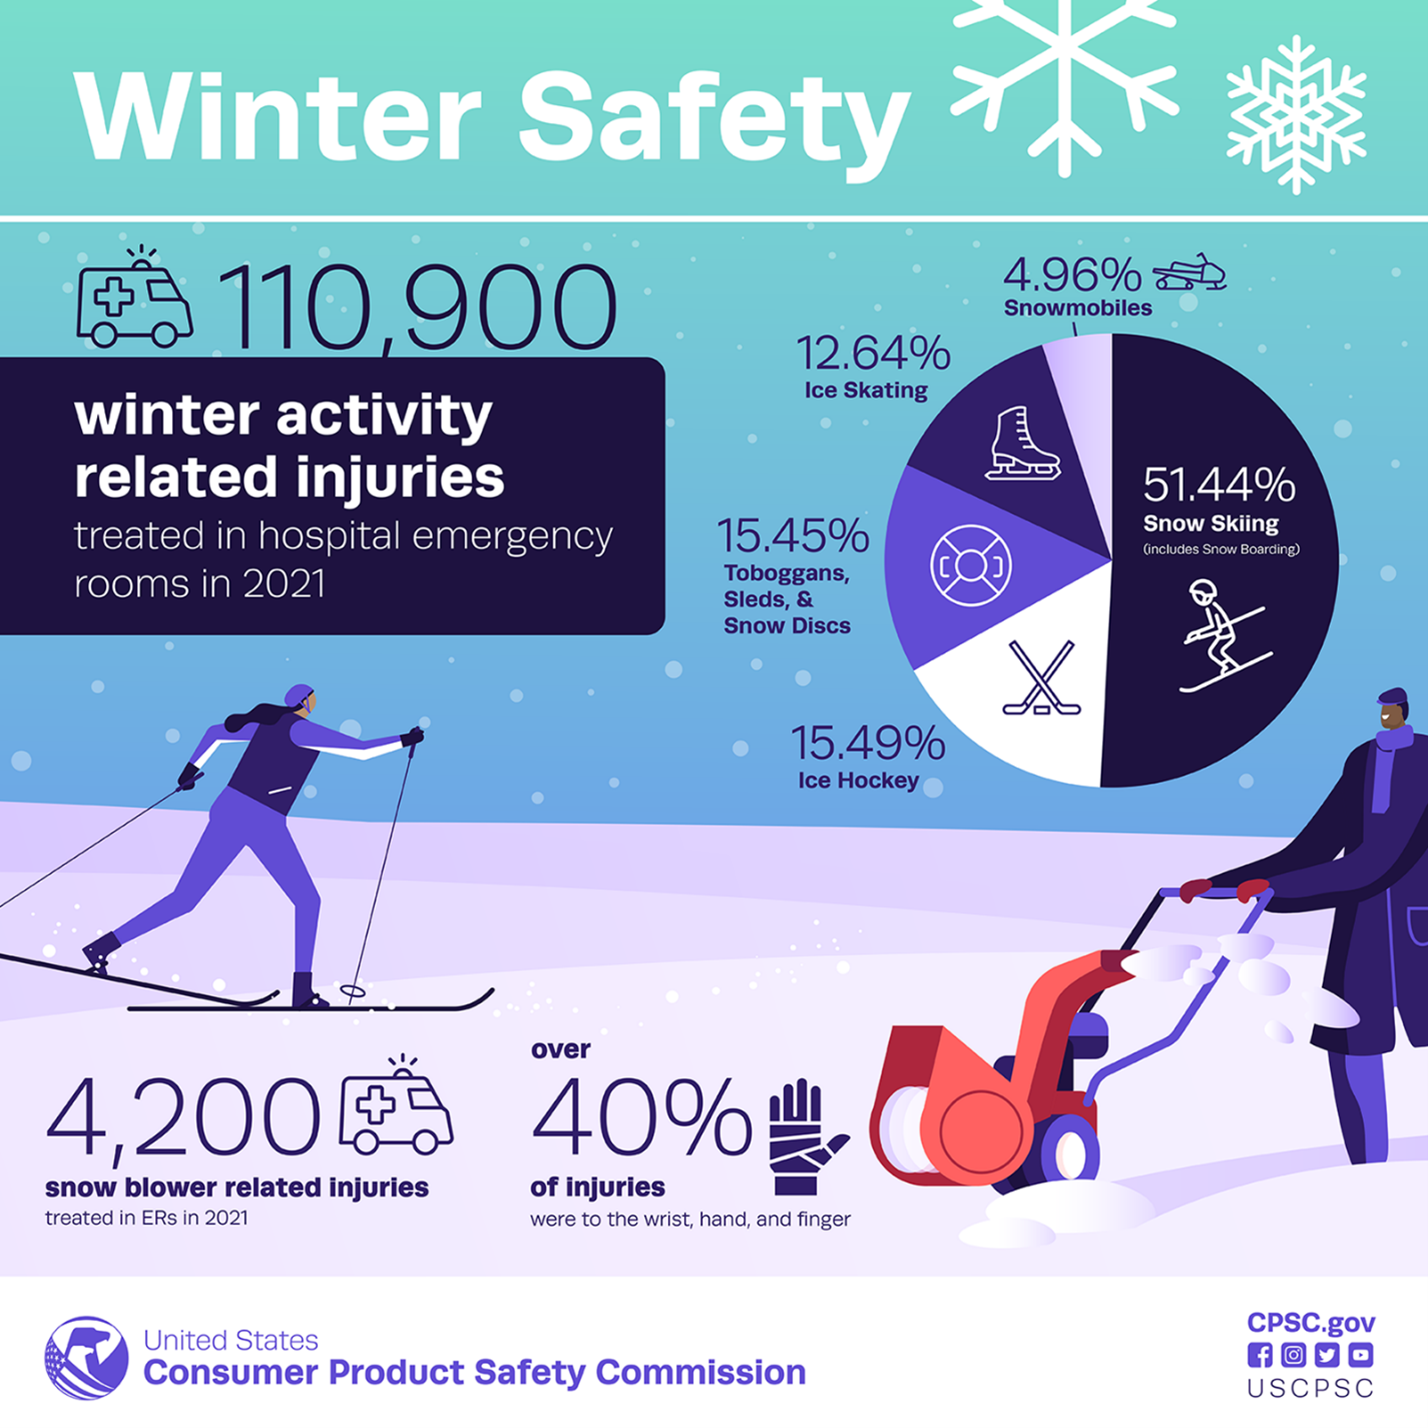 Winter Safety Infographic 